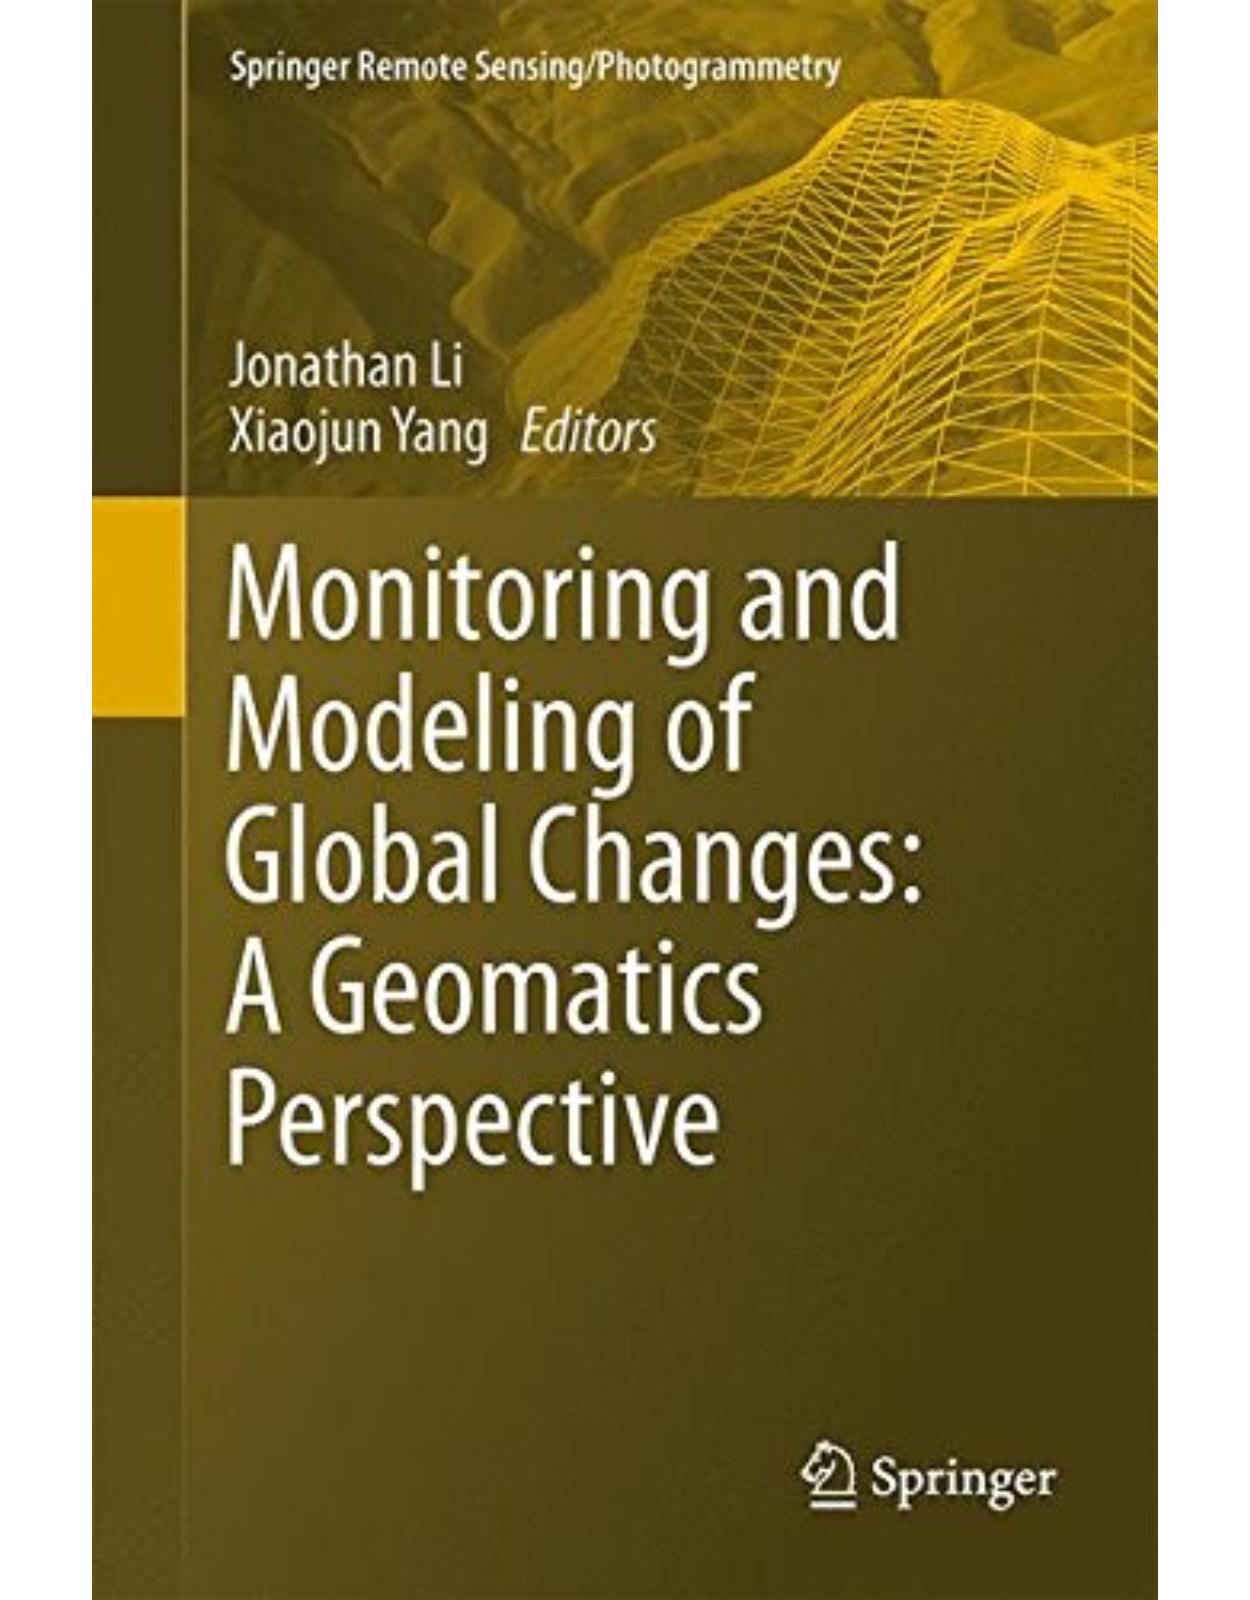 Monitoring and Modeling of Global Changes: A Geomatics Perspective (Springer Remote Sensing/Photogrammetry)